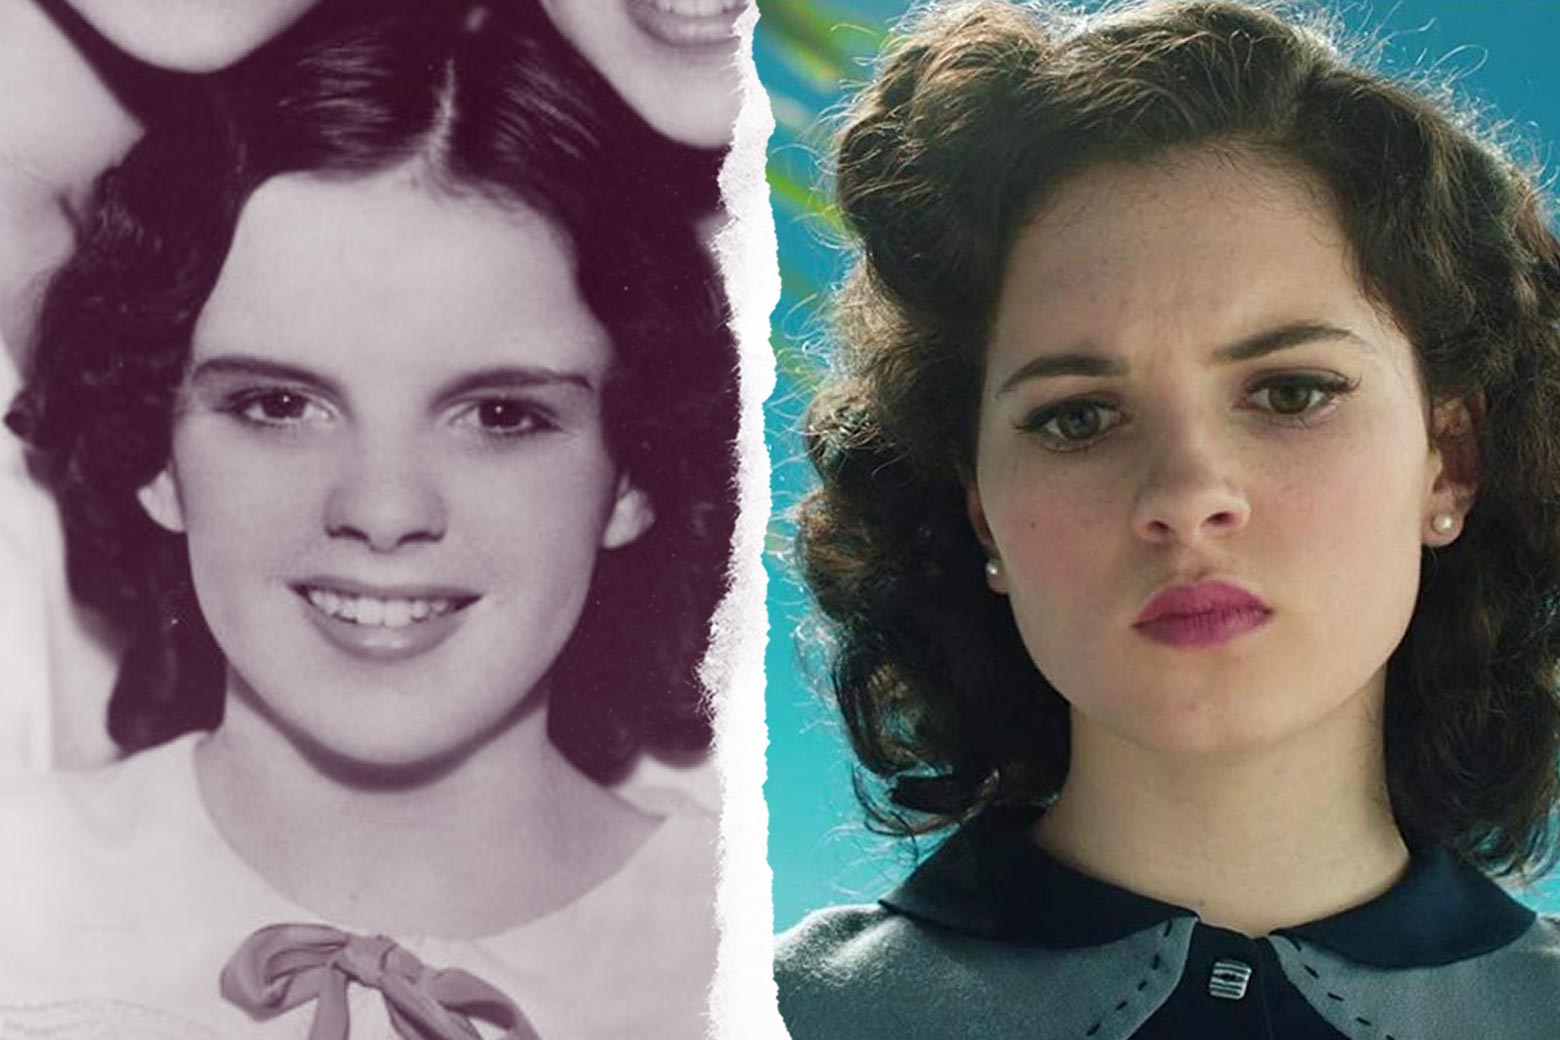 Side-by-side of young Judy Garland, and Darci Shaw as young Judy Garland in the movie Judy.